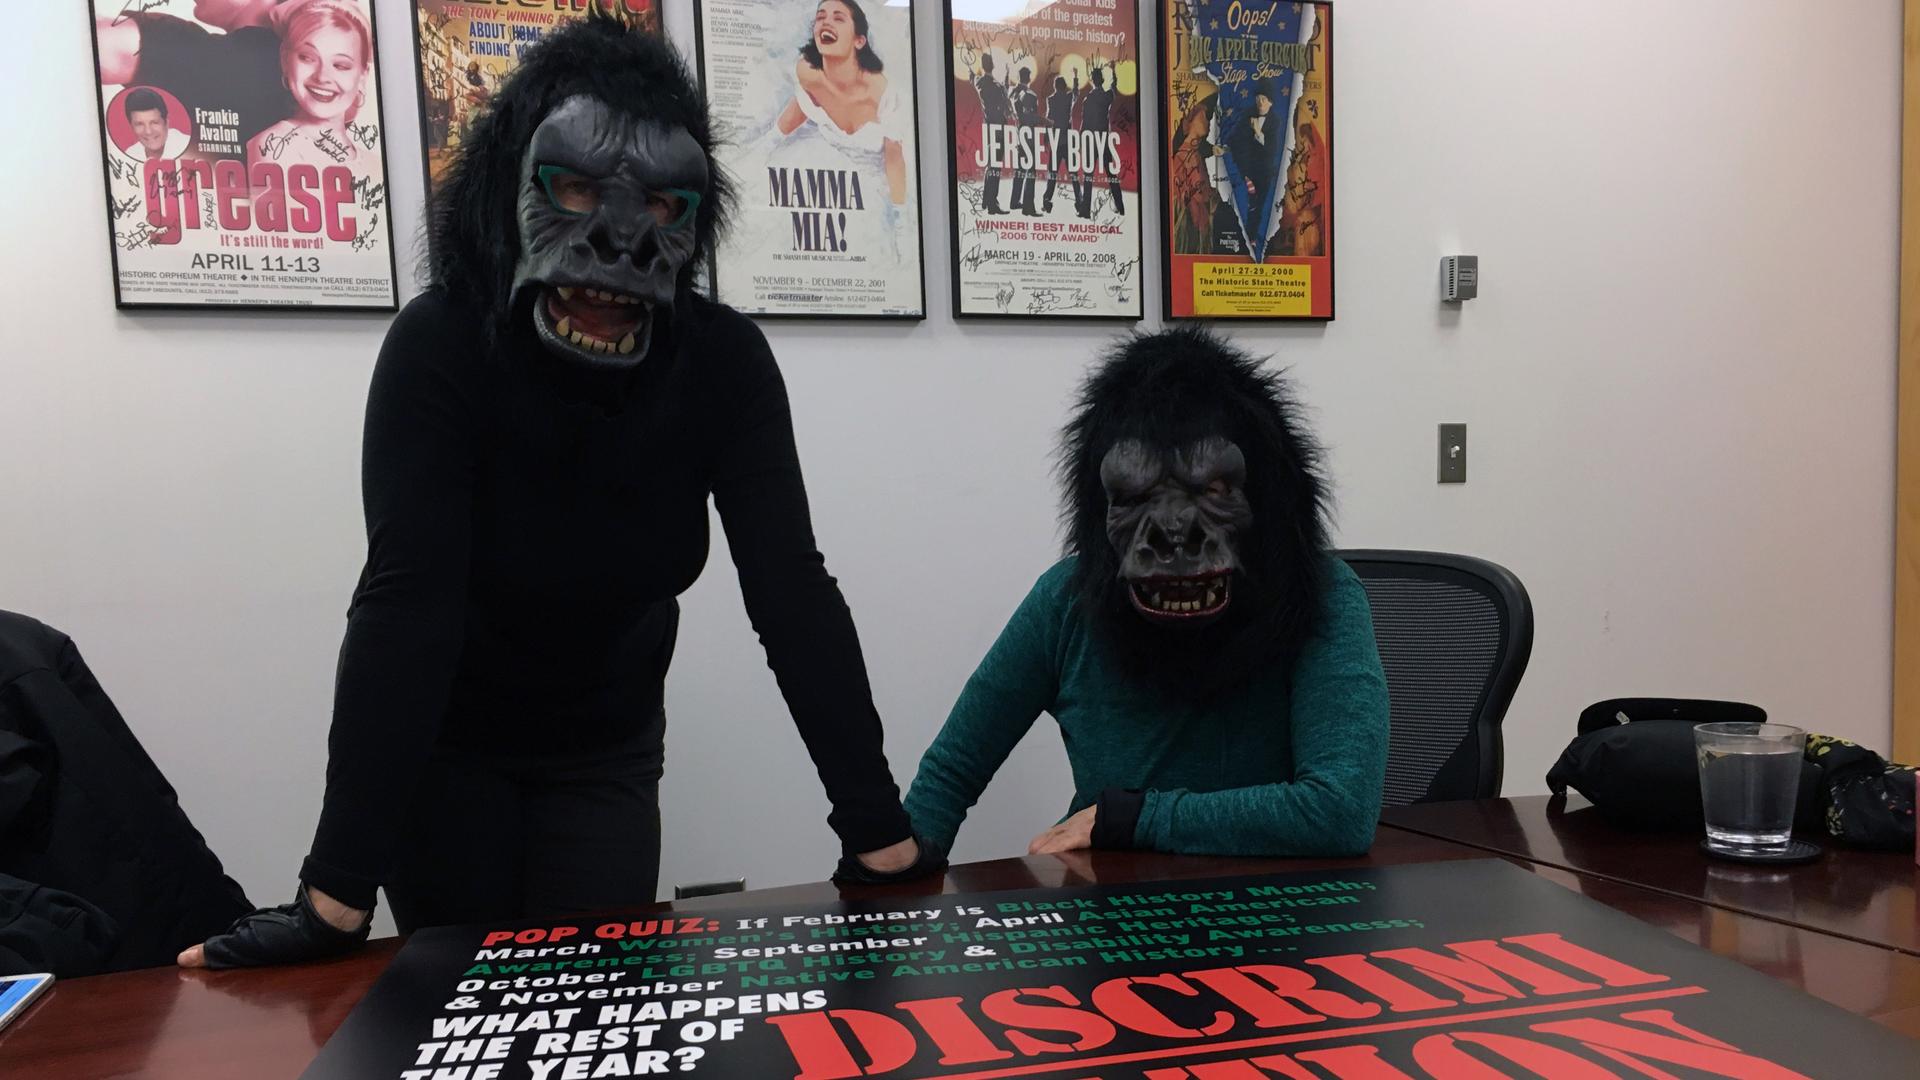 Two women in gorilla masks pose in front of their poster, which critiques the special months devoted to the history of marginalized groups.